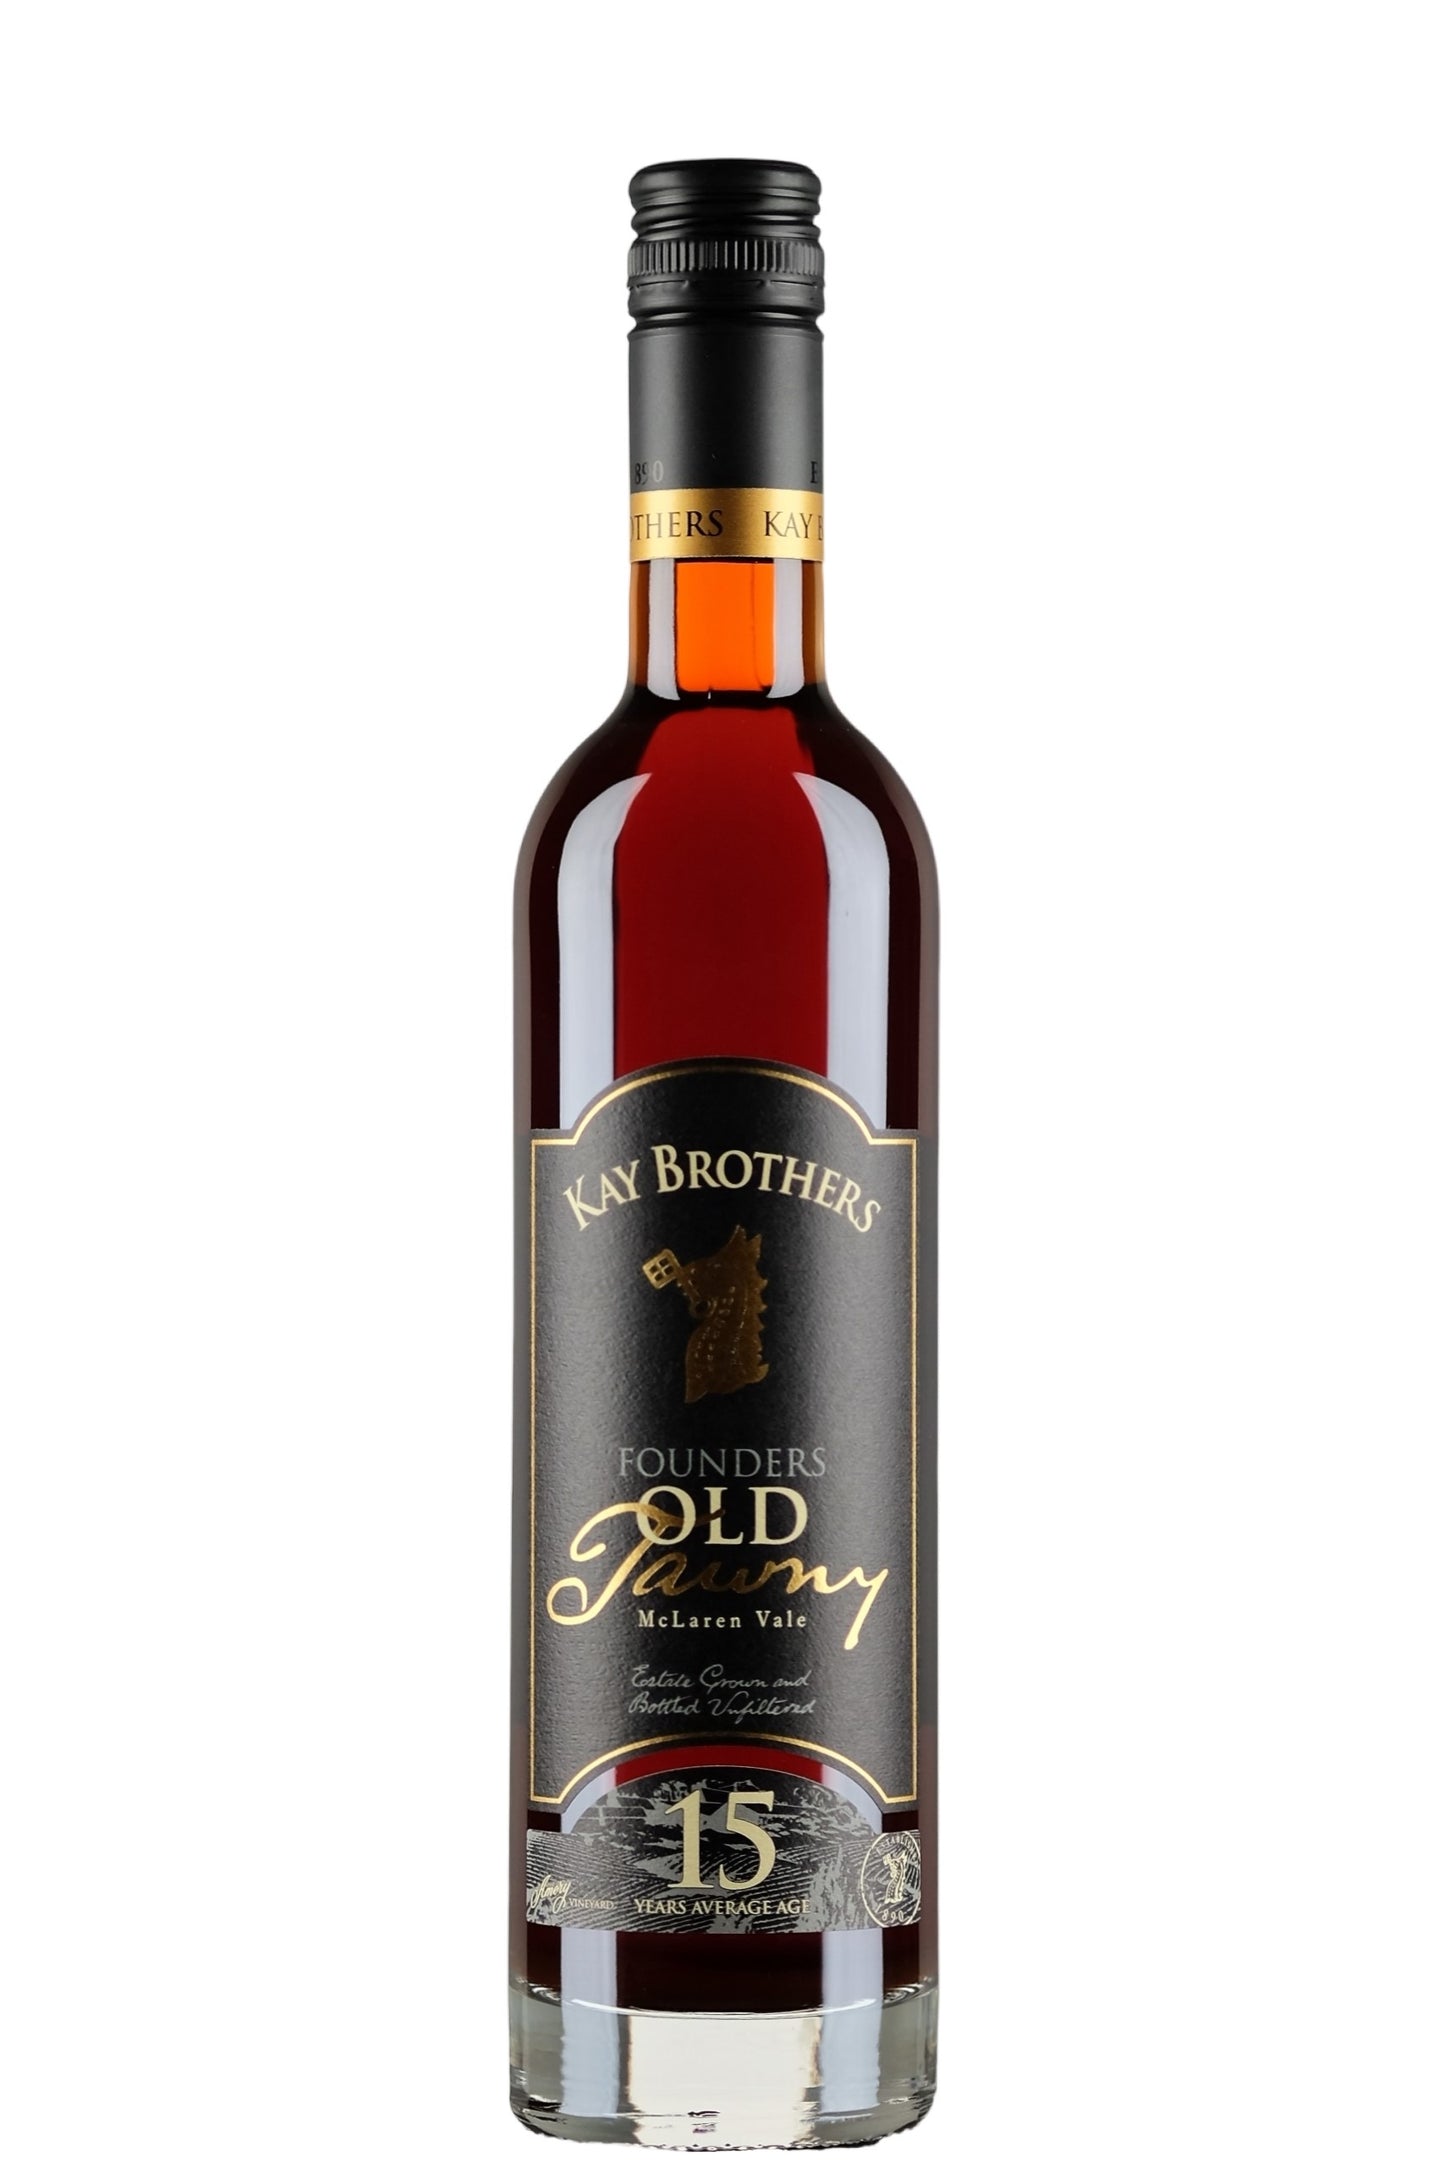 Kay Brothers Founders Old Tawny Port 500ml